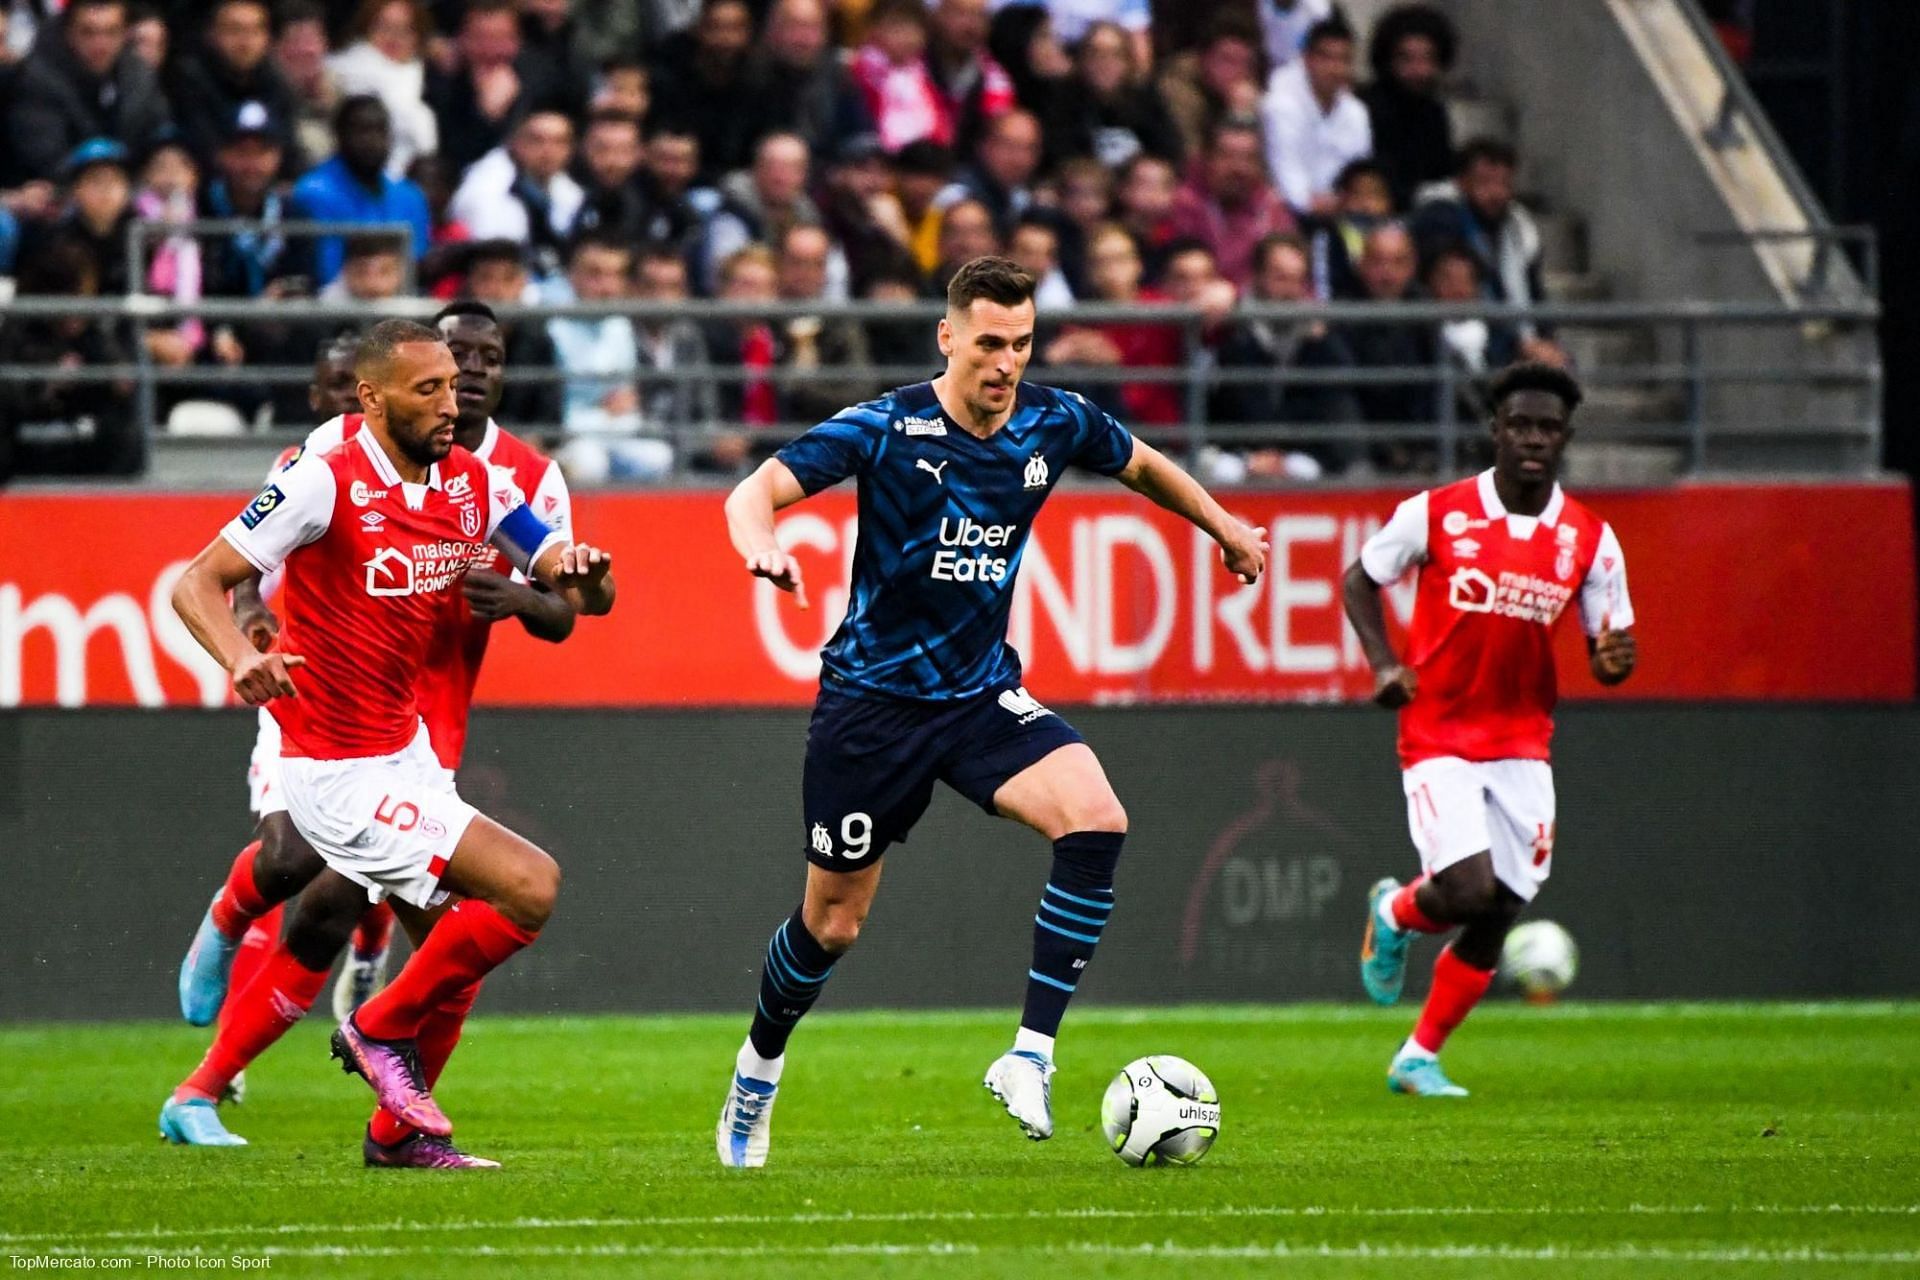 Marseille and Reims square off in their Ligue 1 opener on Sunday